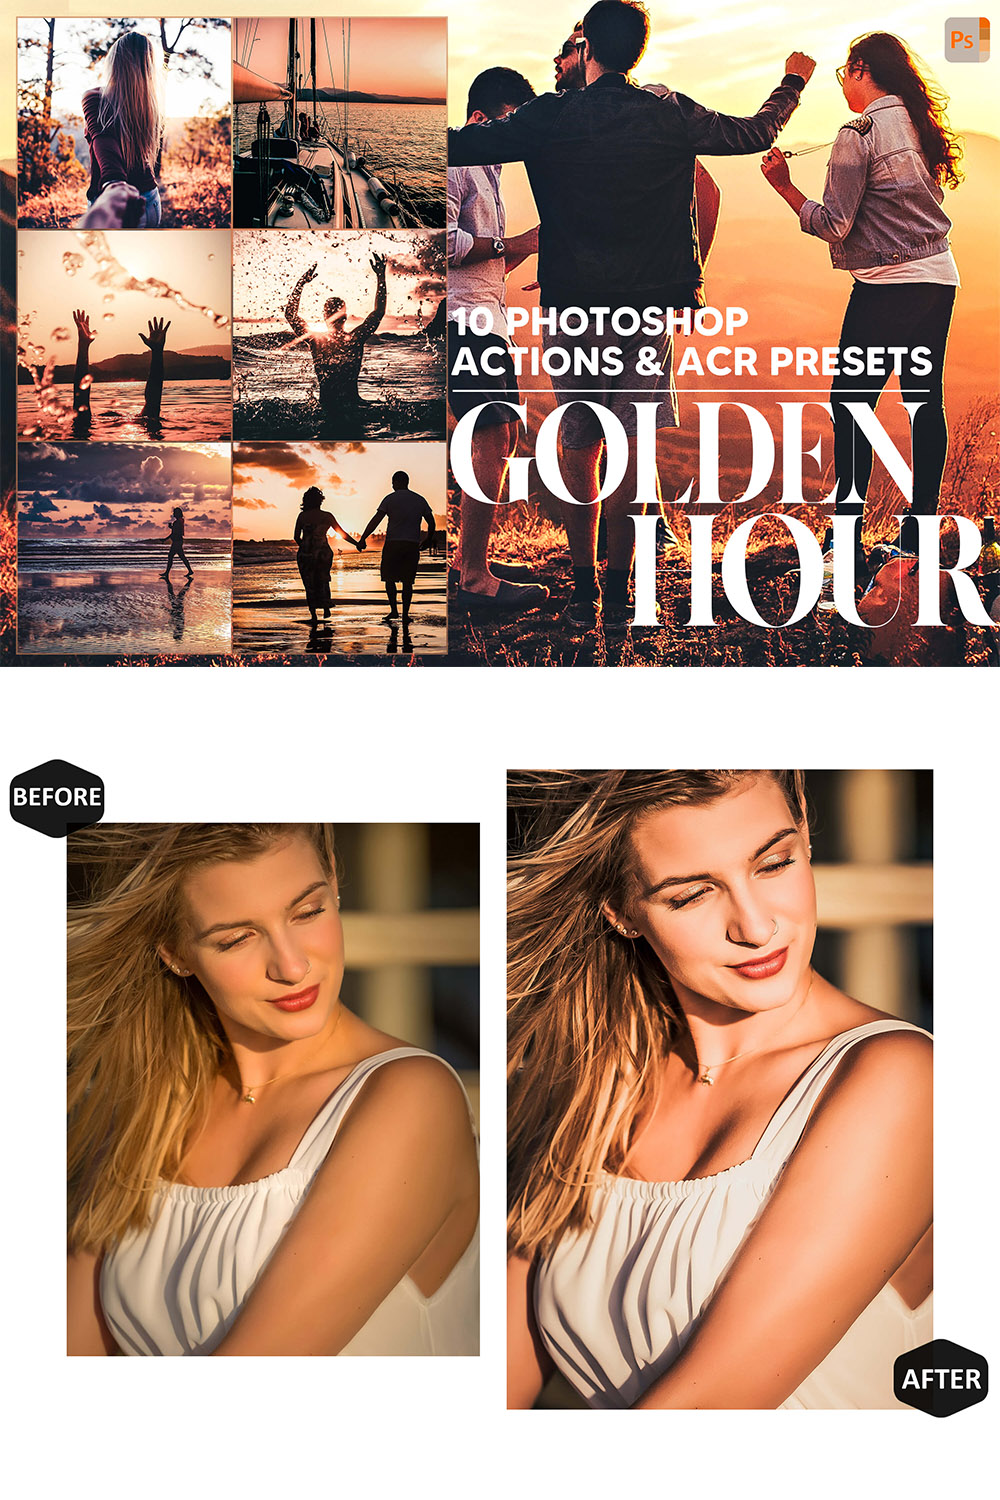 10 Photoshop Actions, Golden Hour Ps Action, Sunset ACR Preset, Sunshine Ps Filter, Atn Portrait And Lifestyle Theme For Instagram, Blogger pinterest preview image.